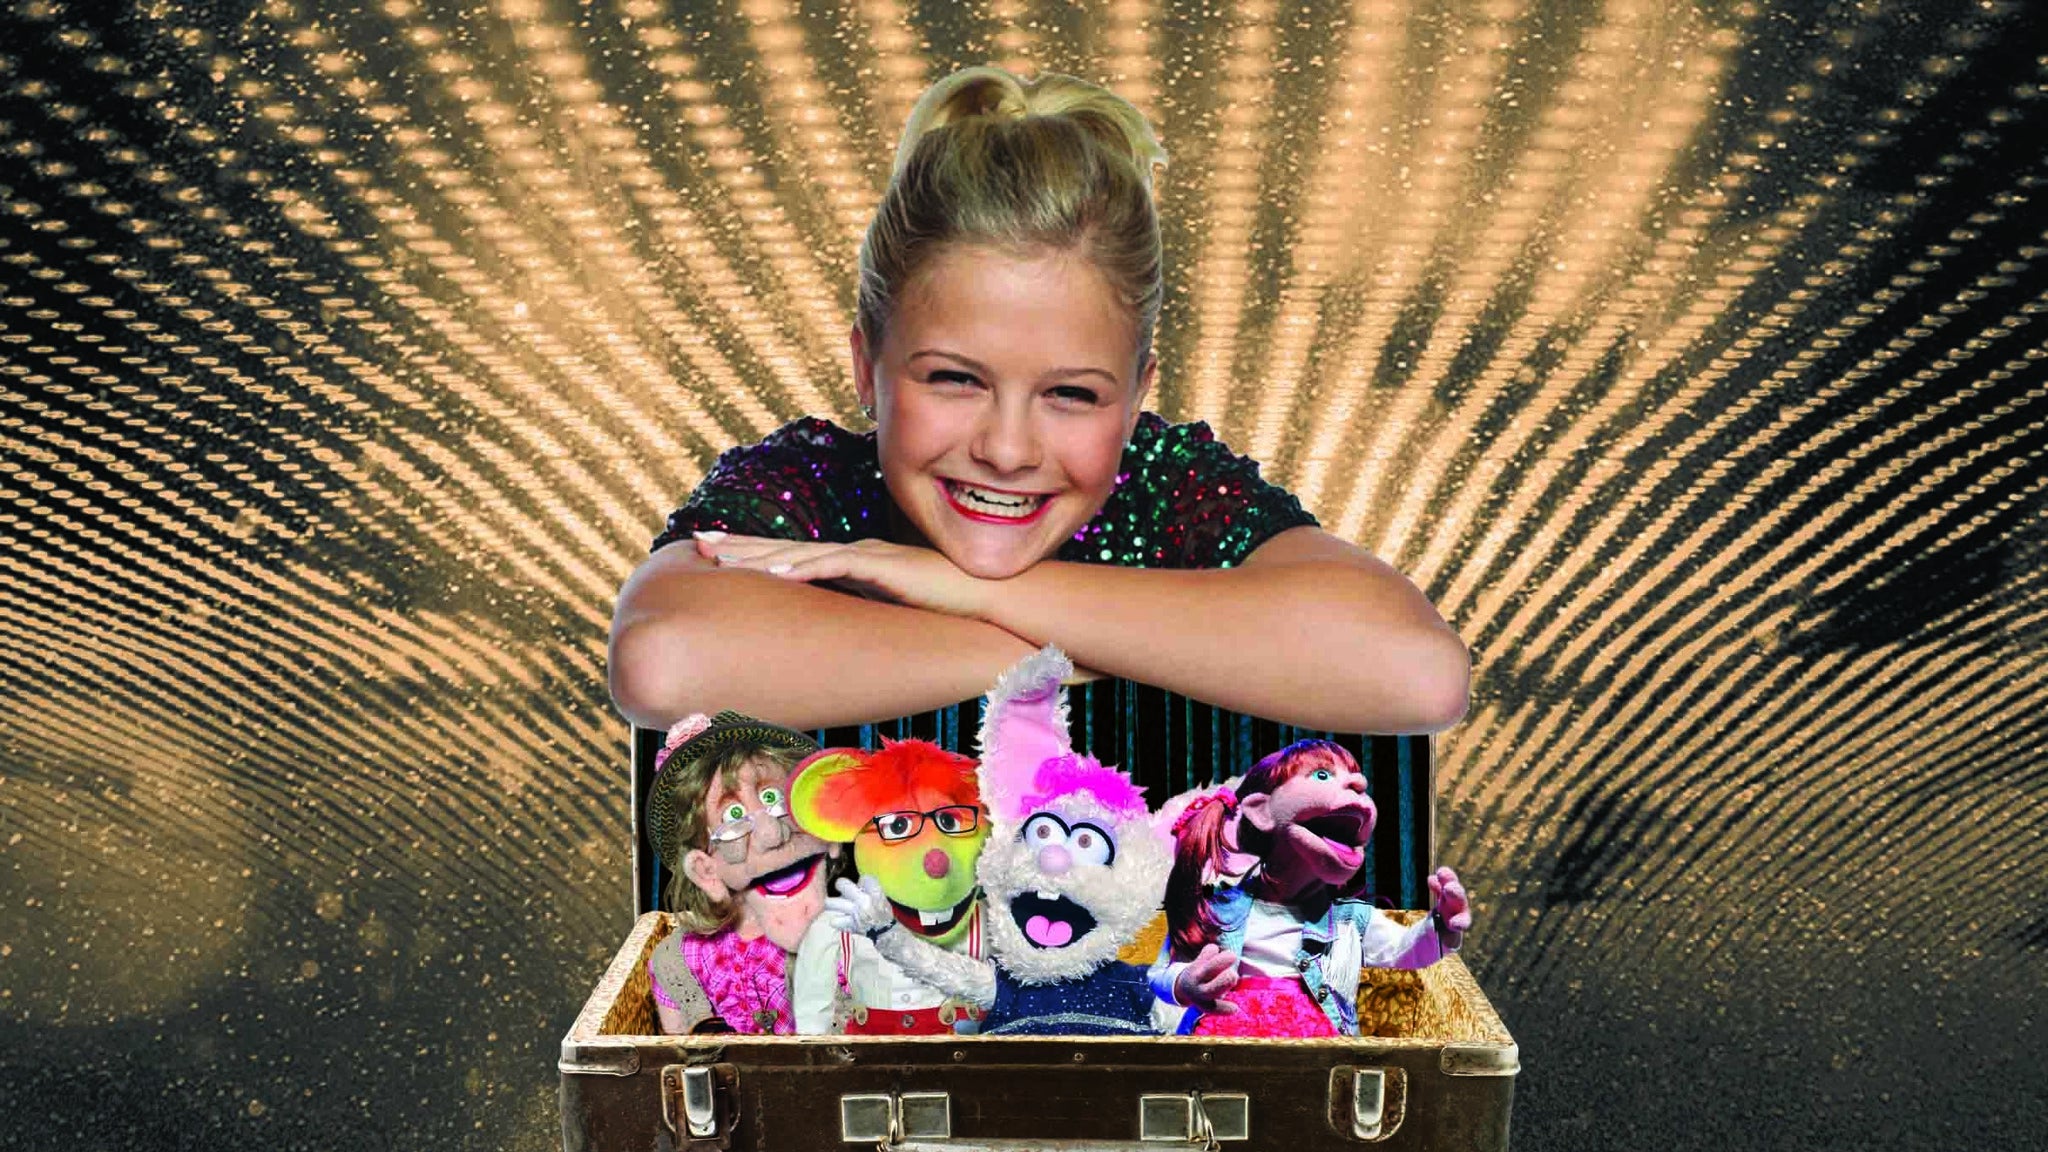 Darci Lynne: My Lips Are Sealed (Except When They're Not) in Reno promo photo for VIP Package presale offer code